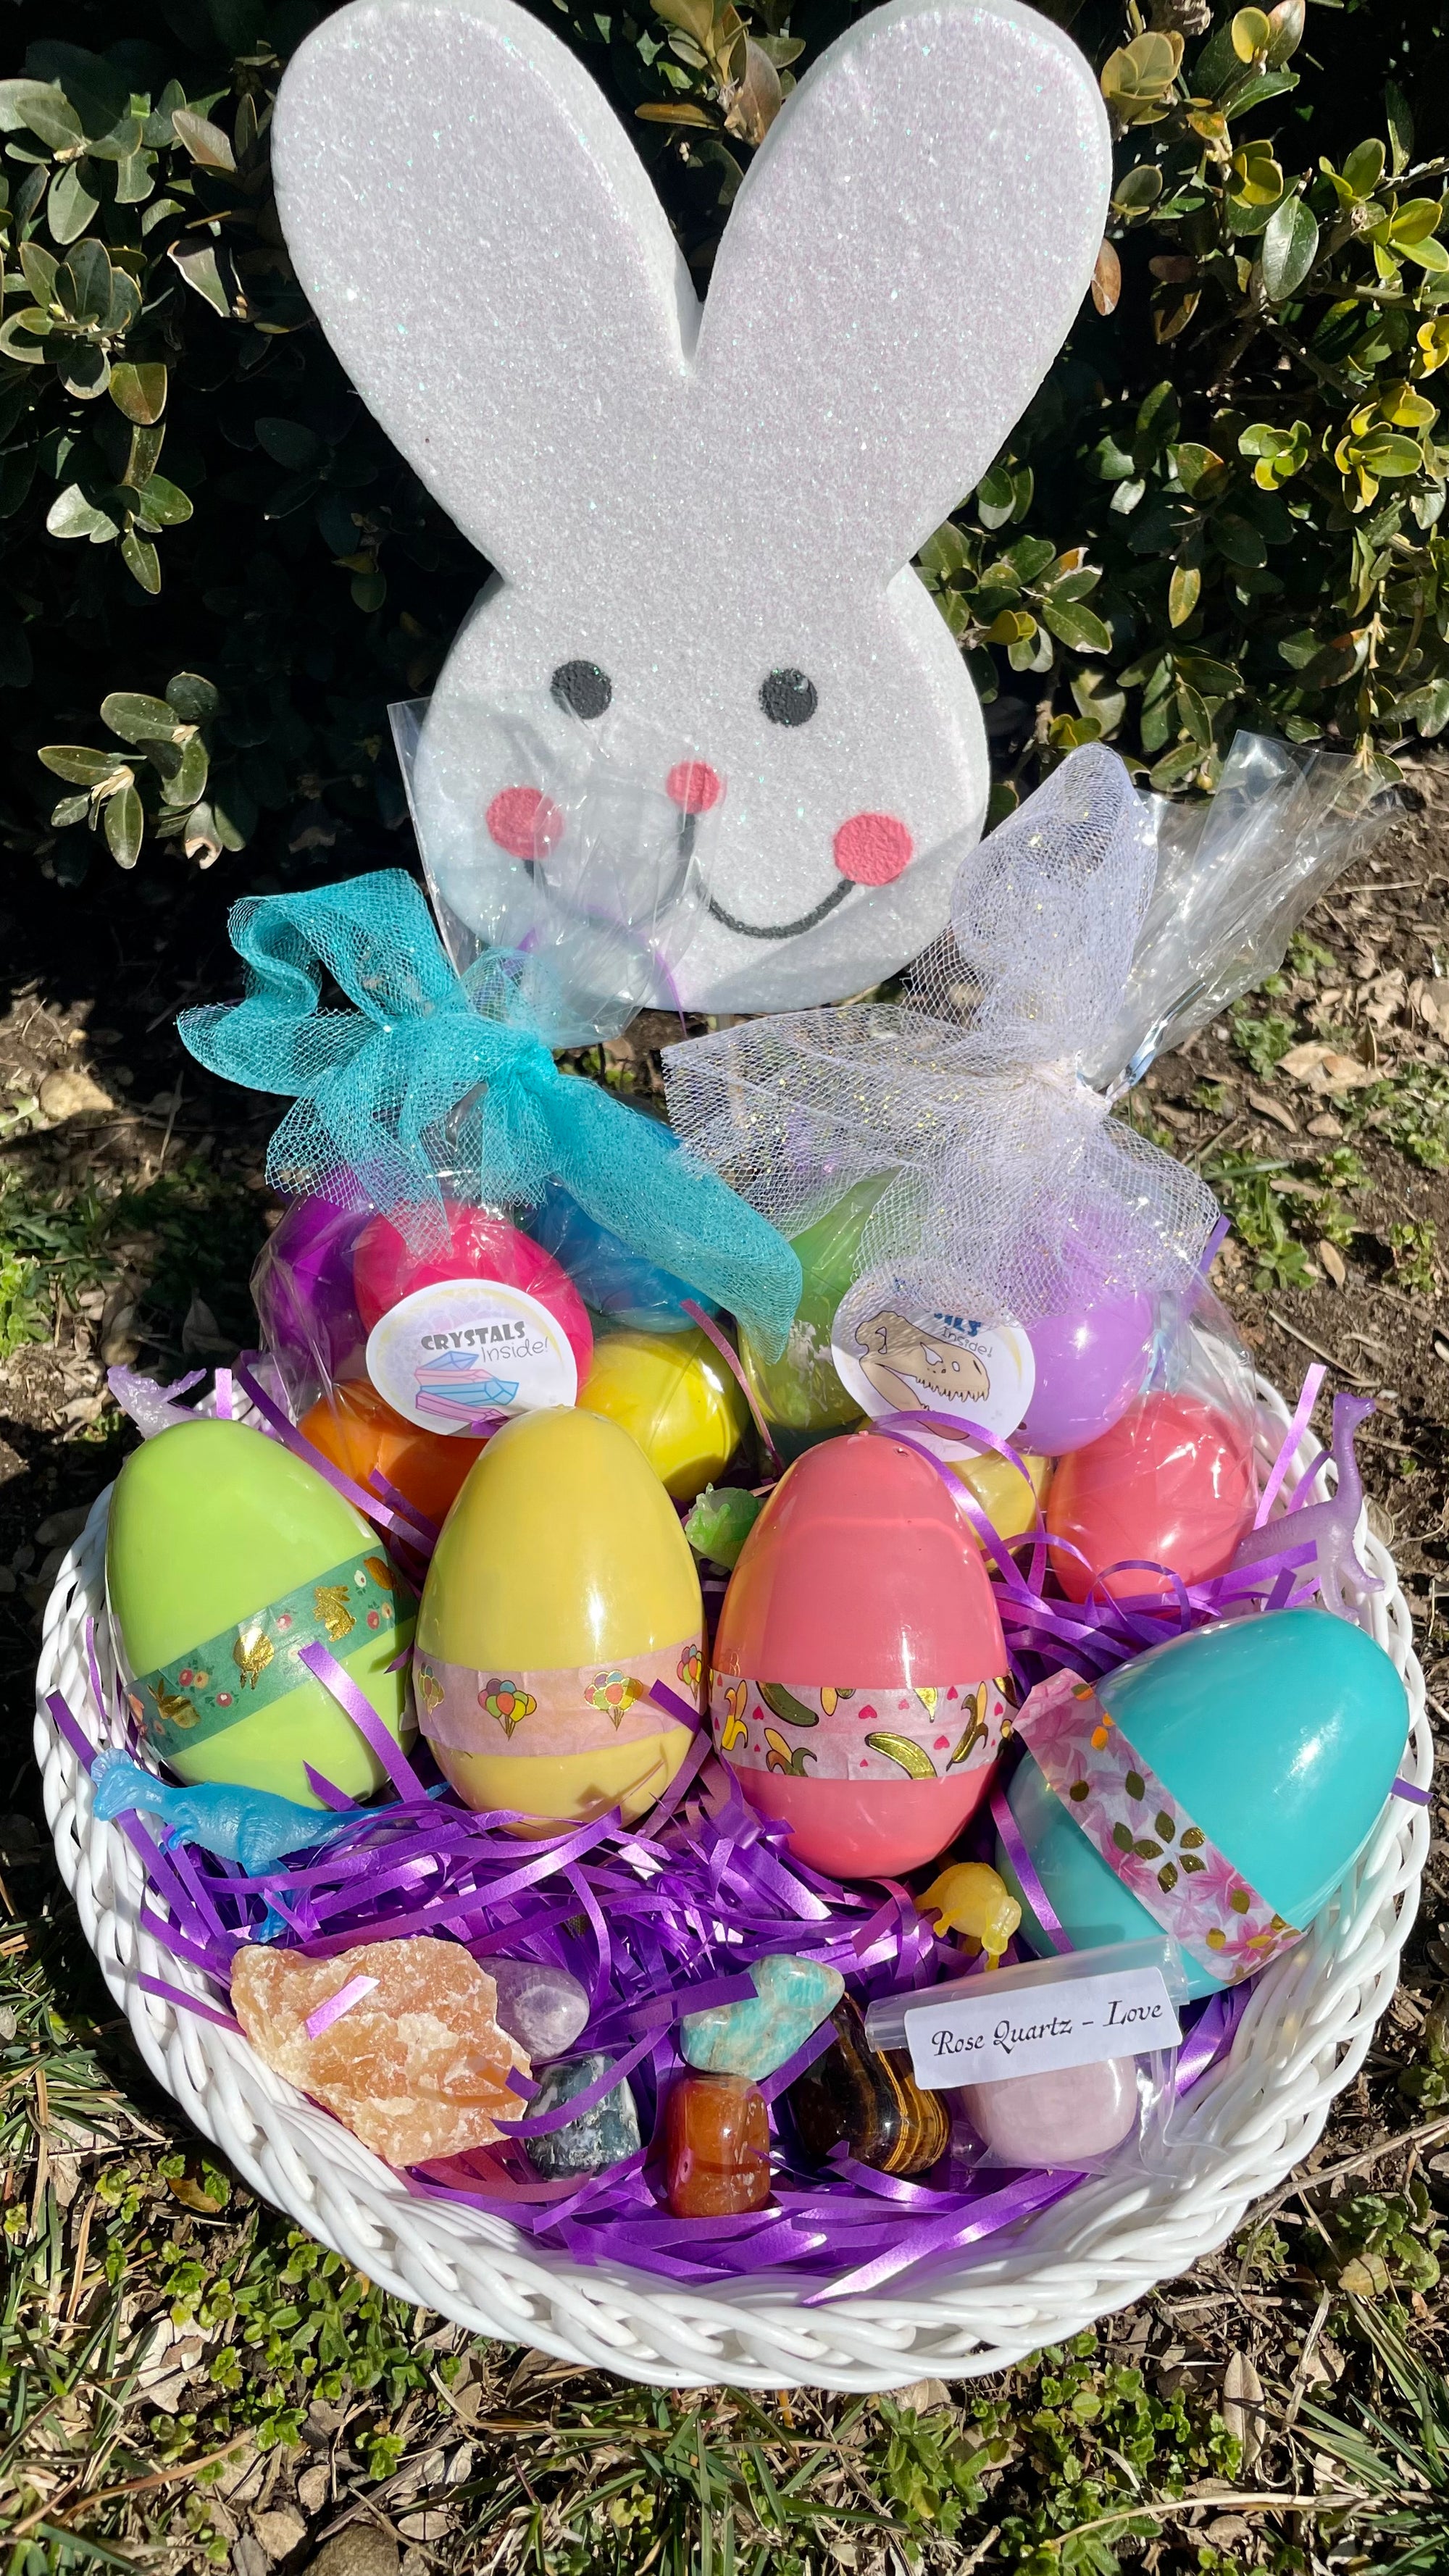 Egg-citing Treasures: Easter Eggs Prefilled with Toys and Crystals/Fossils